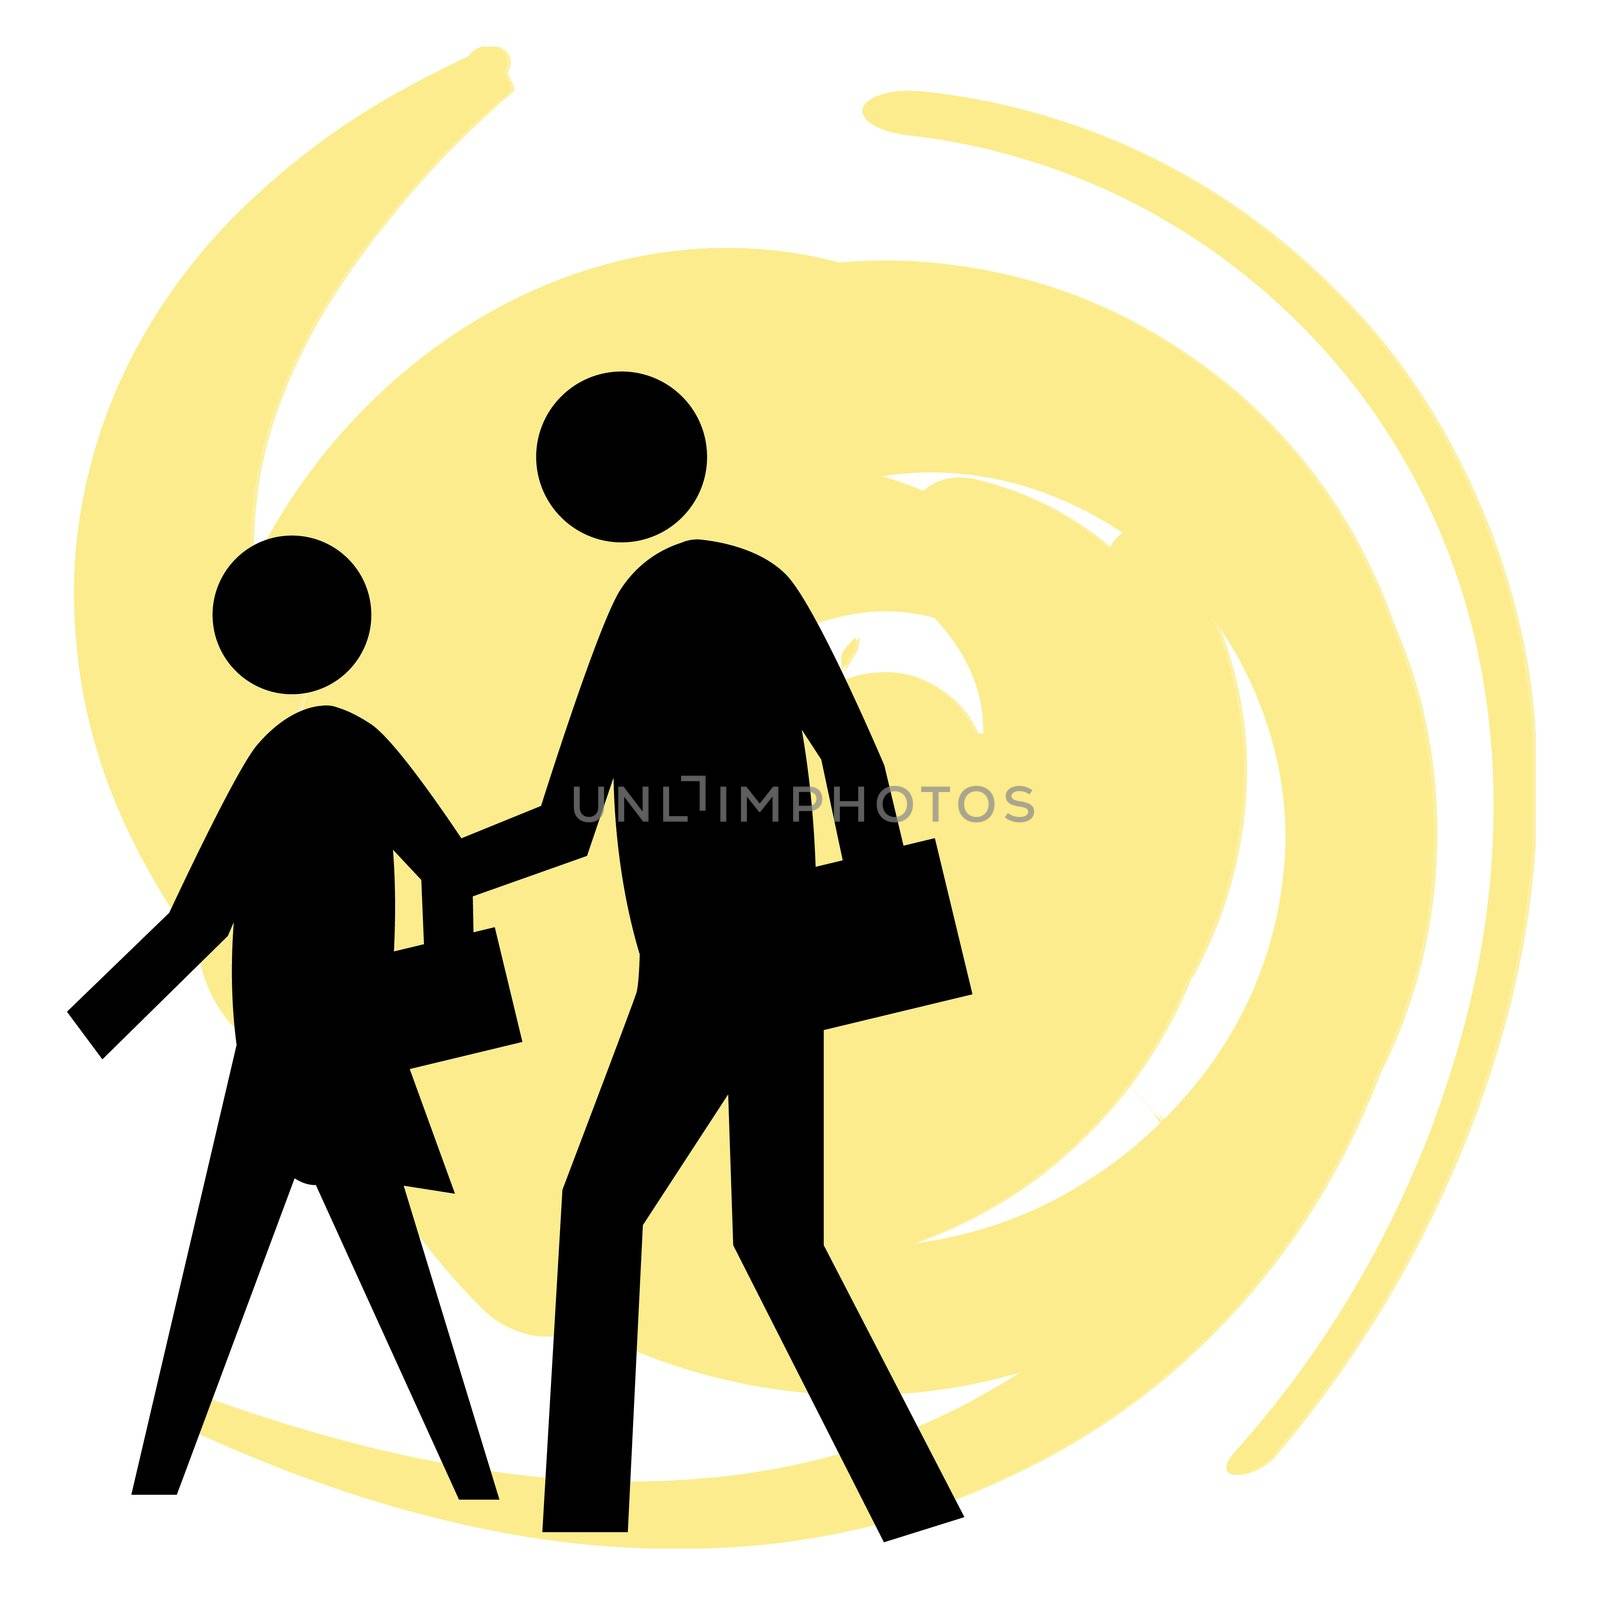 A black graphic image showing the classic school crossing figures against a modern yellow swirl background